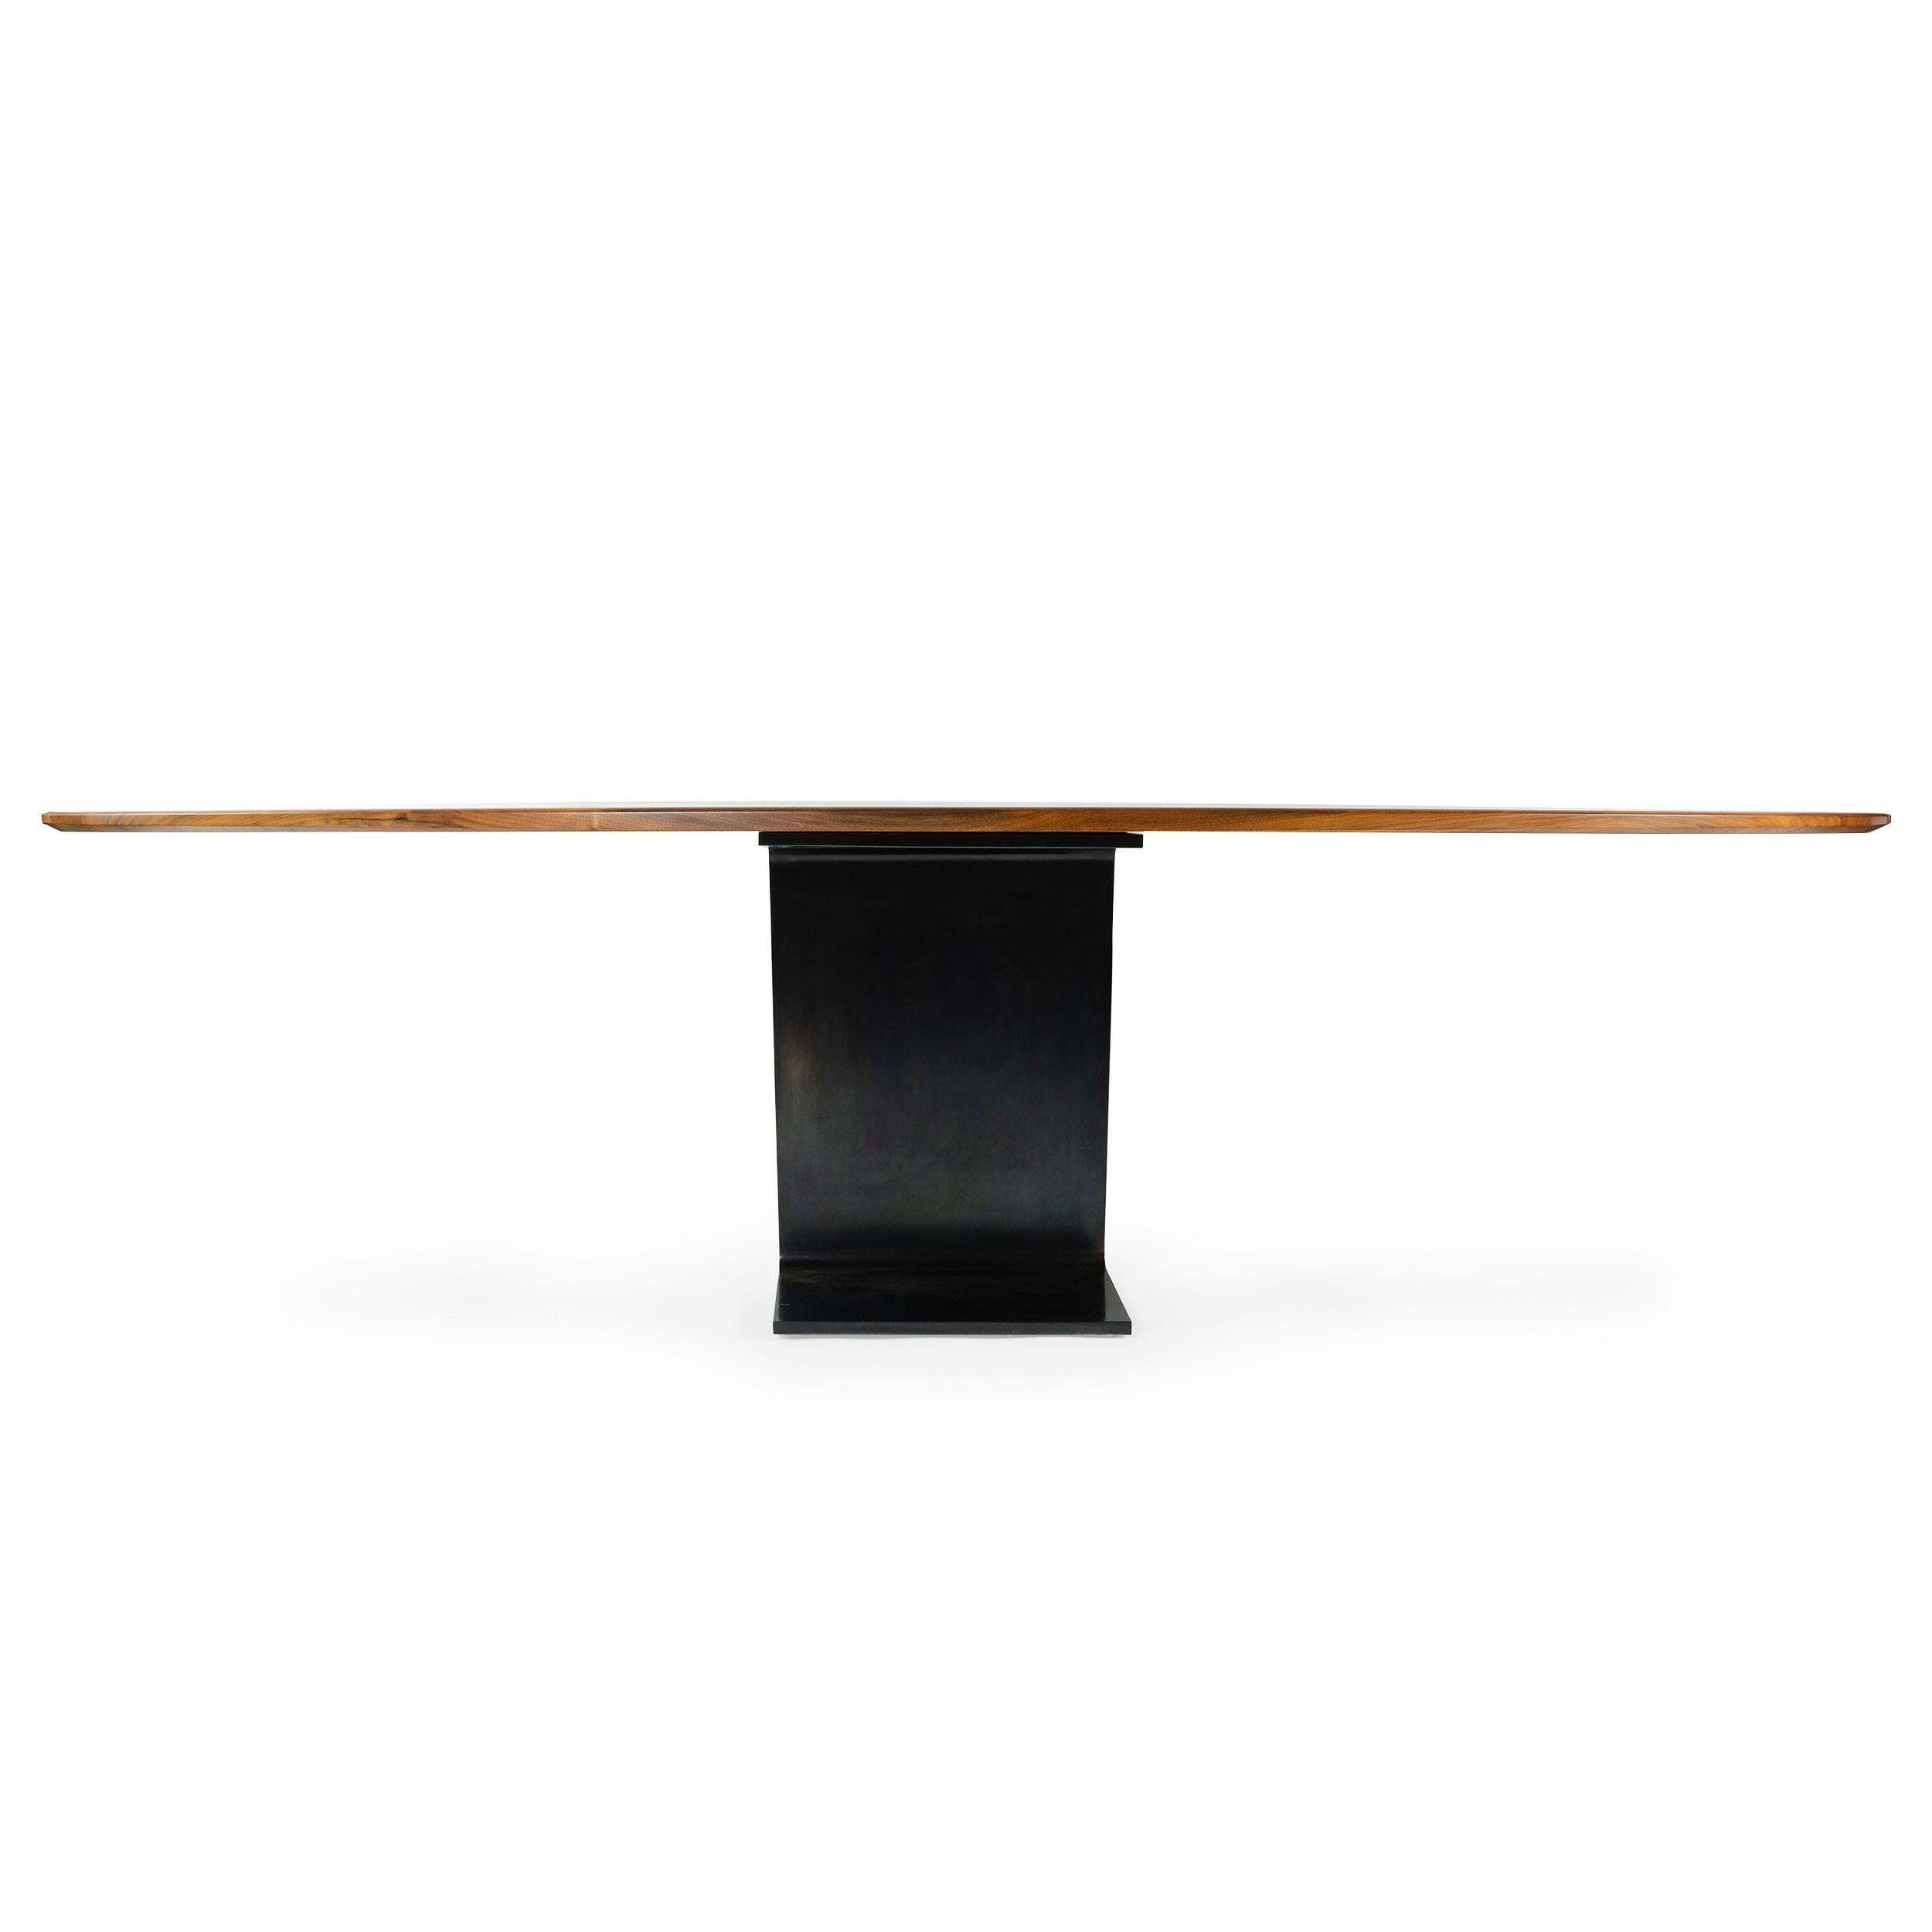 A custom ellipse table with a solid walnut wood top and patinated steel base. Wood top measures 53.75 x 108 inches. Manufactured in NY by the Wyeth Workshop. Available in custom sizes.